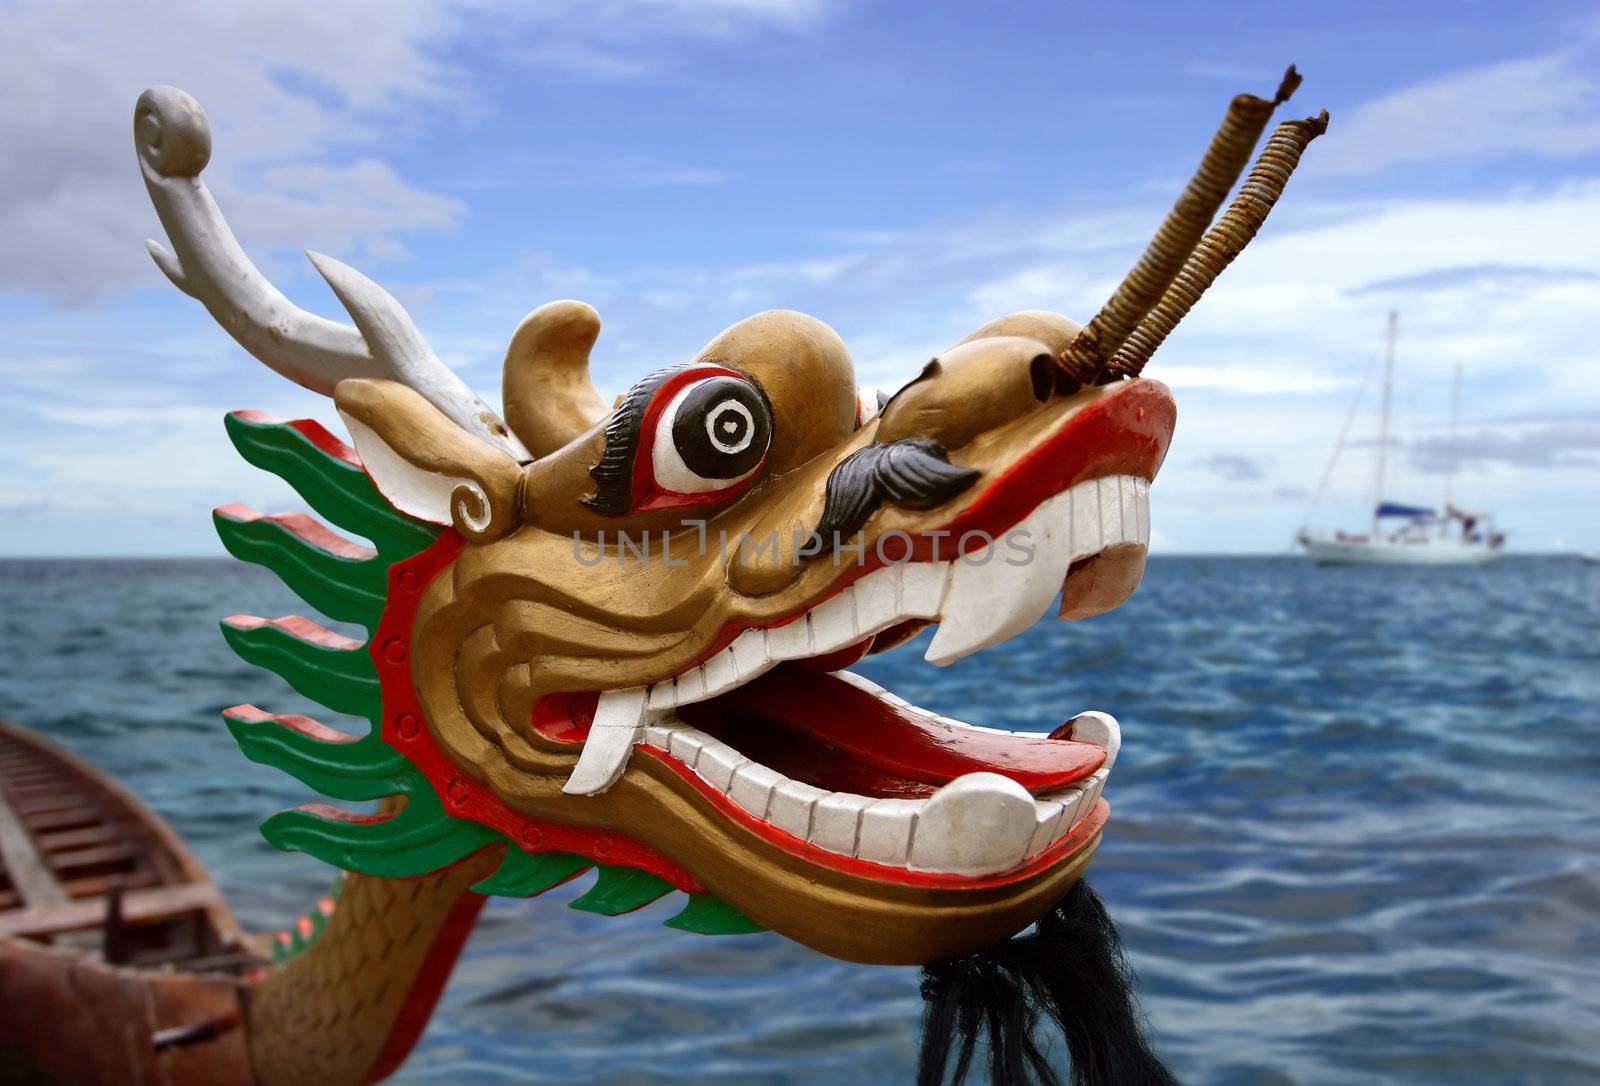 An empty Chinese Dragon boat waiting in the water.
